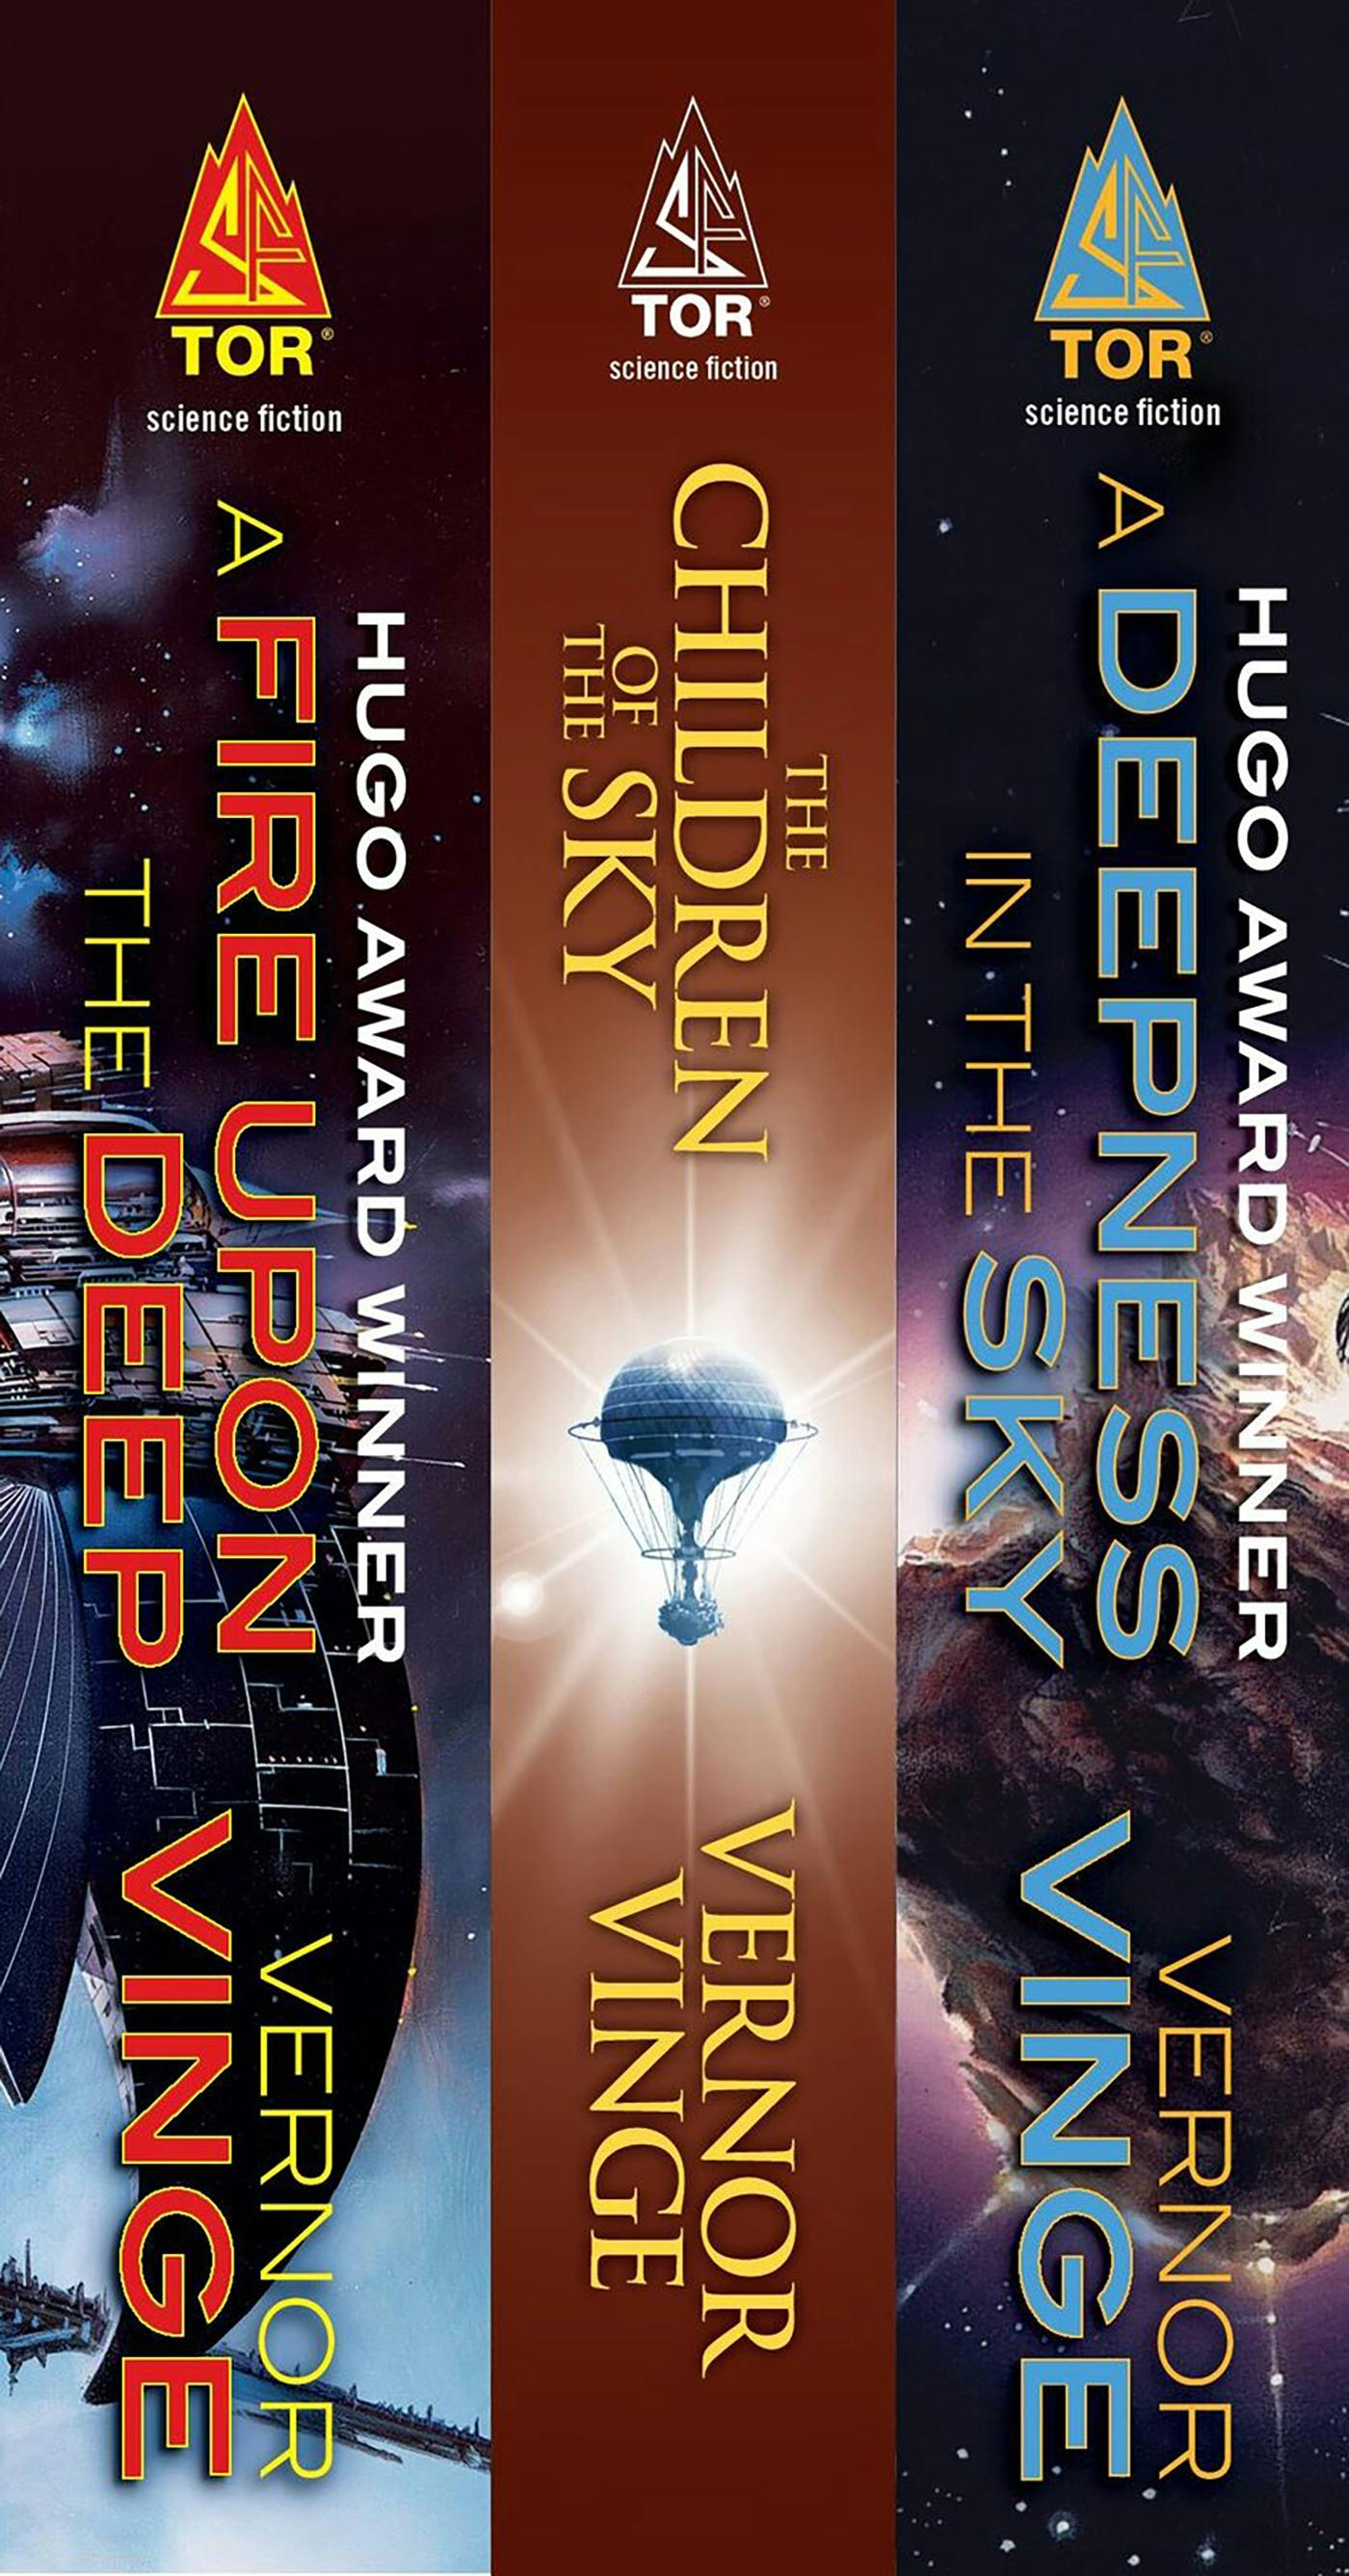 Vernor Vinge: a SciFi prophet due for re-discovery of his books and  predictions about VR, drones, the Singularity and the internet of things